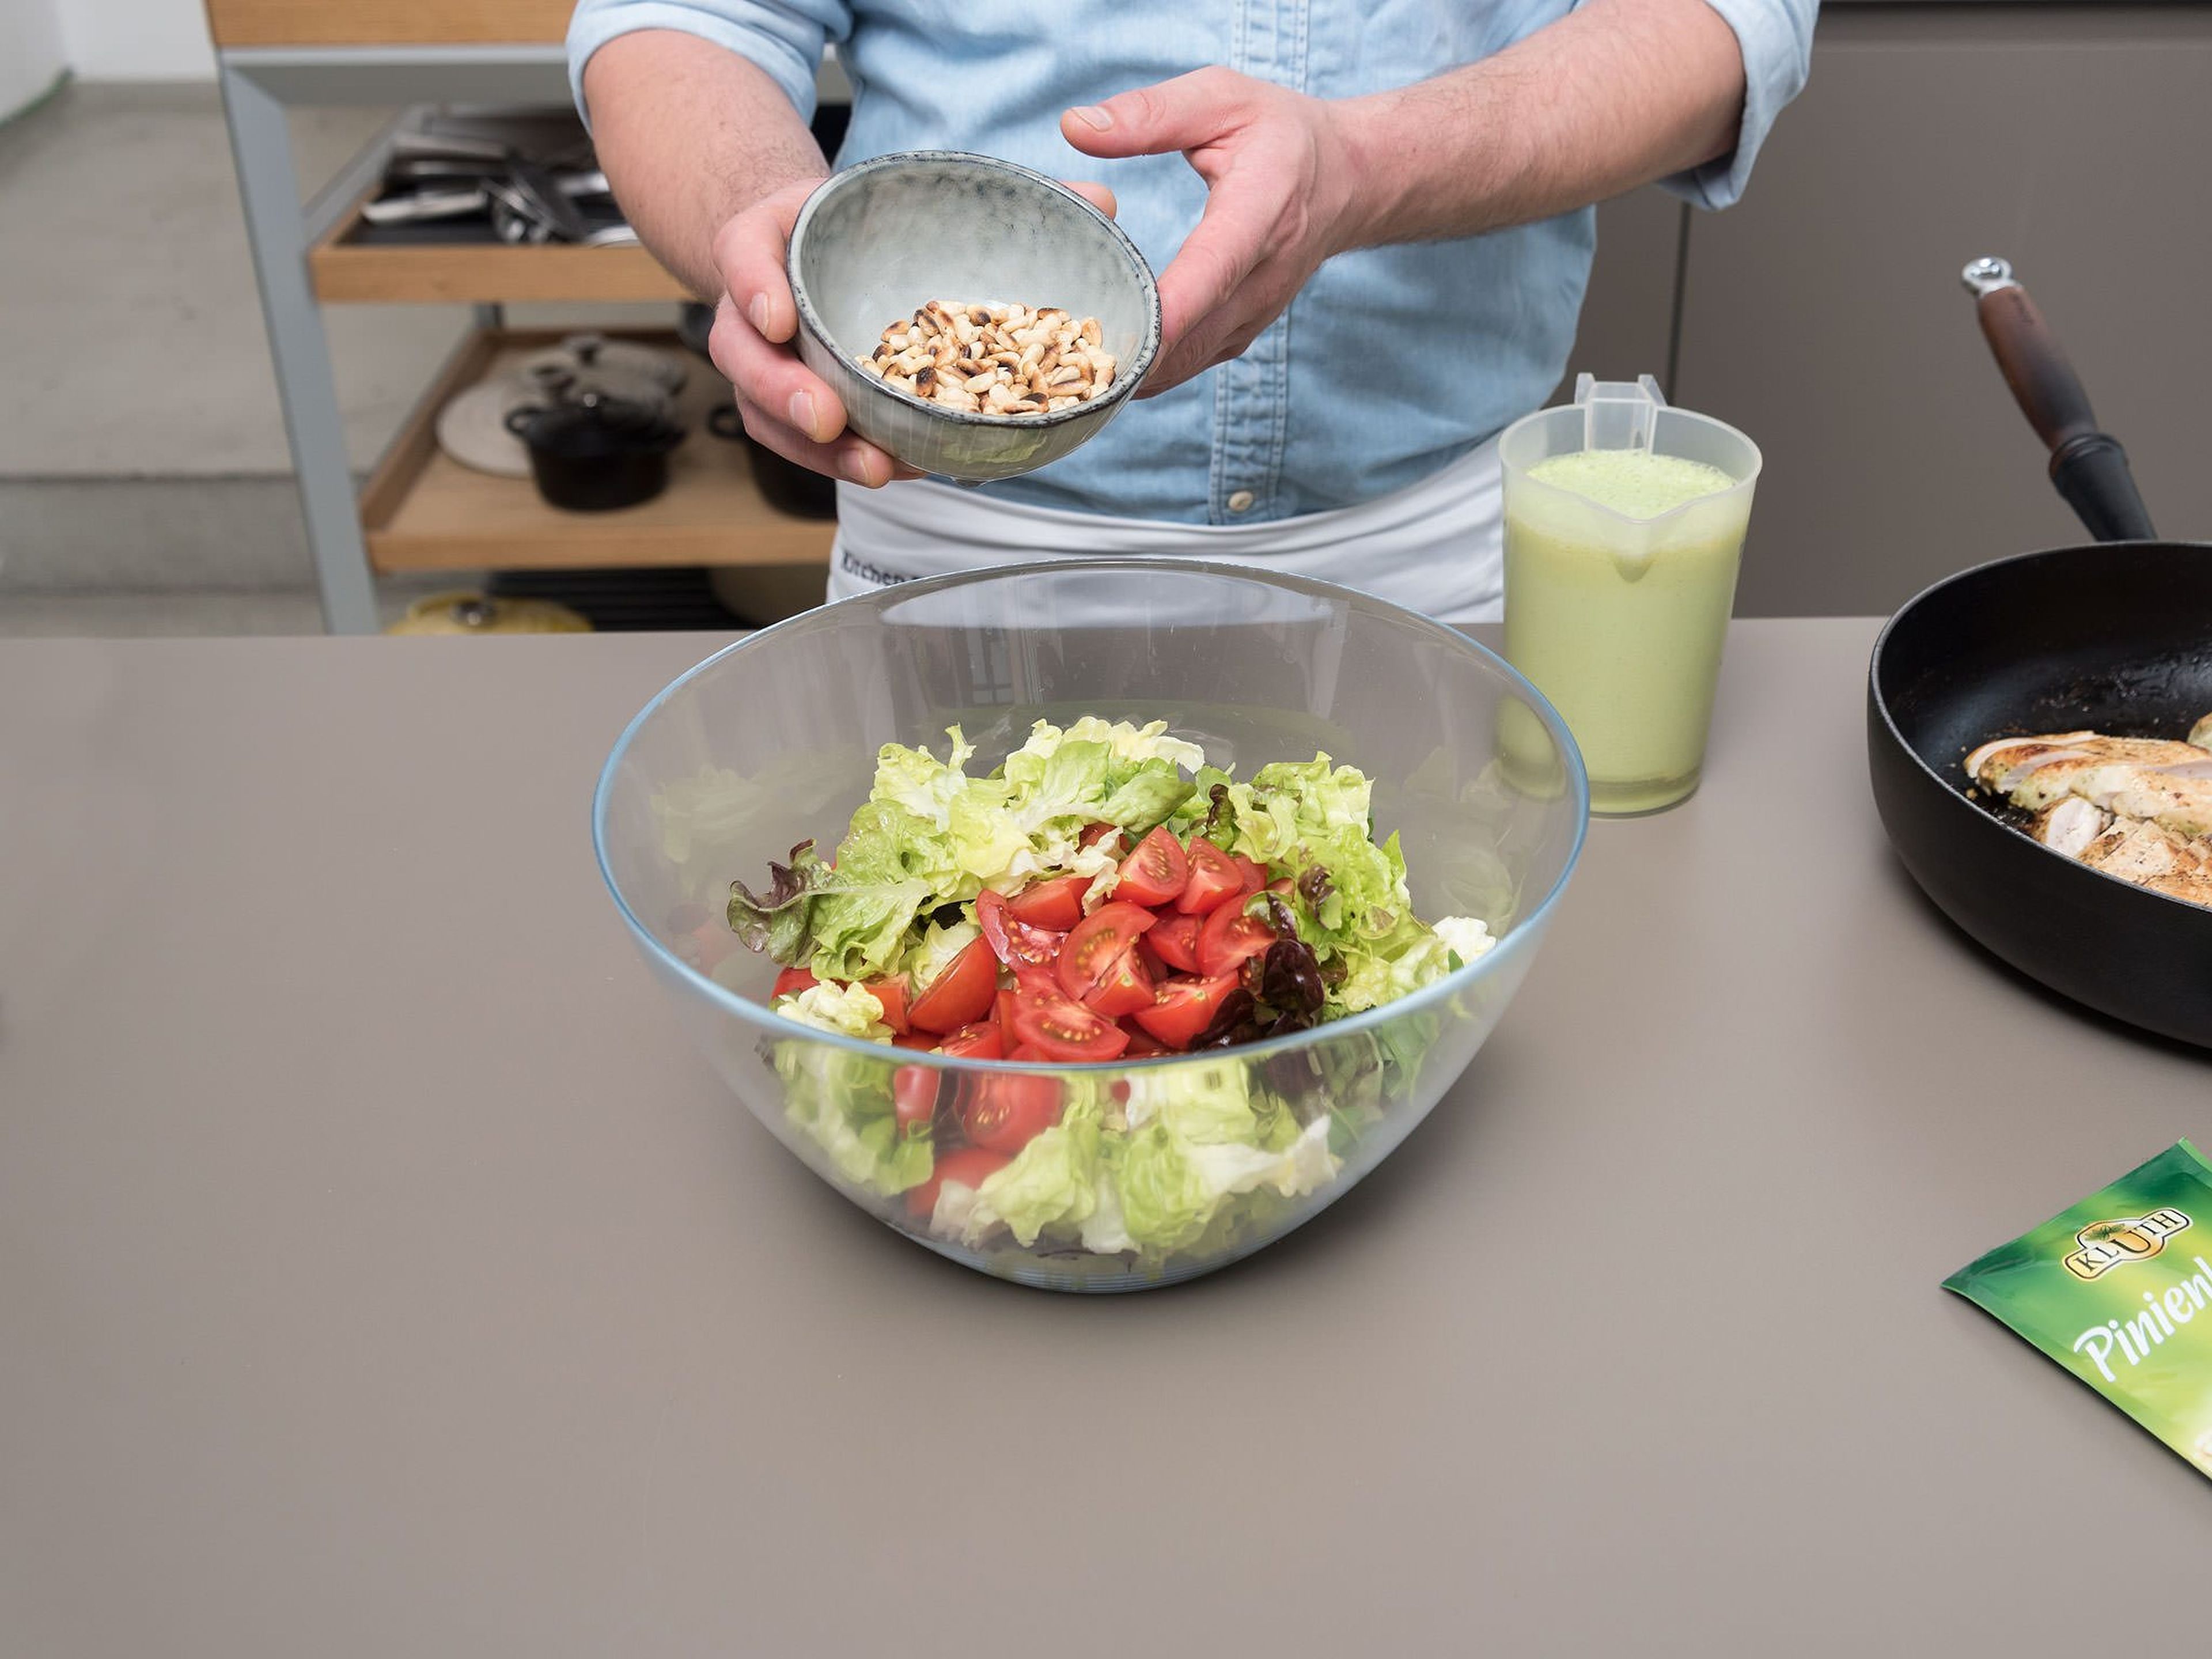 In the meantime, toast pine nuts in small frying pan over medium heat for approx. 3 min., or until golden brown. Add to salad. Pour some of the remaining dressing on top and toss to coat. Plate salad and serve with chicken breast on top. Enjoy!